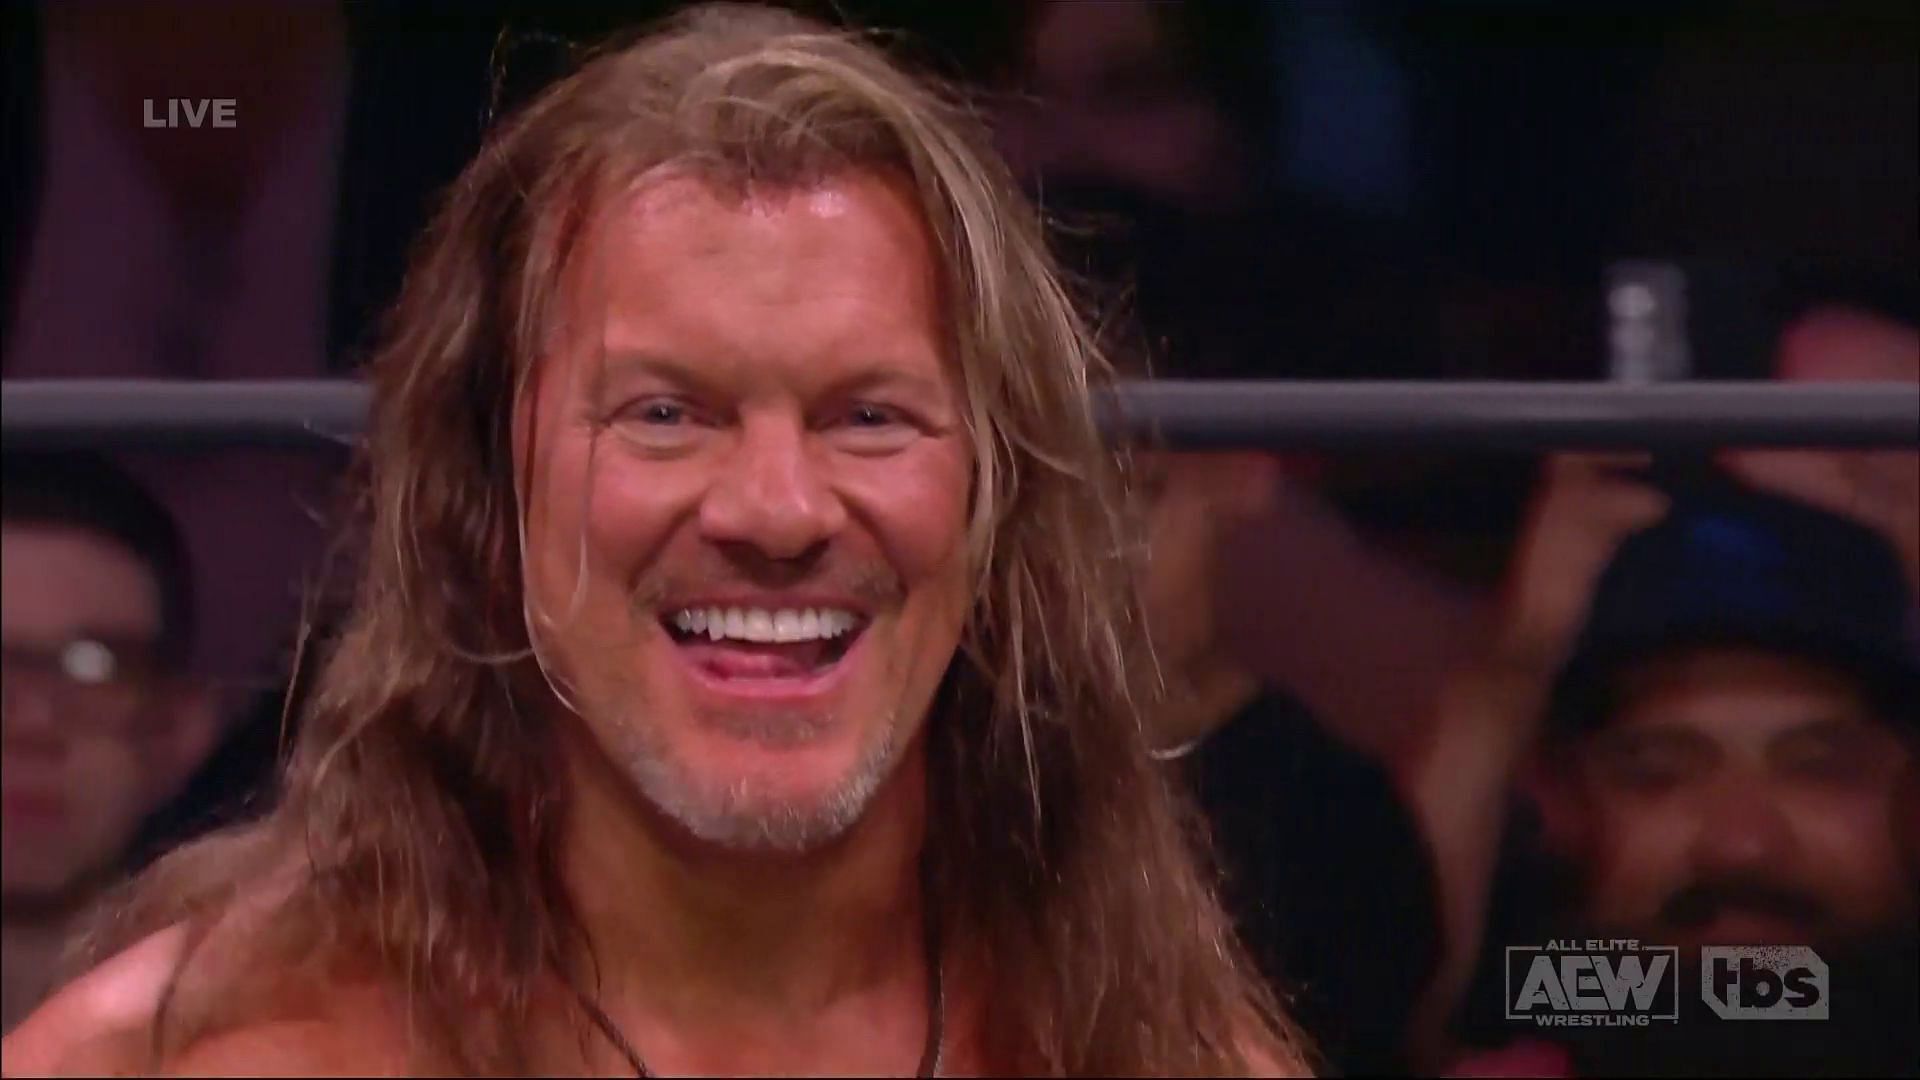 Jericho has slimmed down considerably in the past few months.